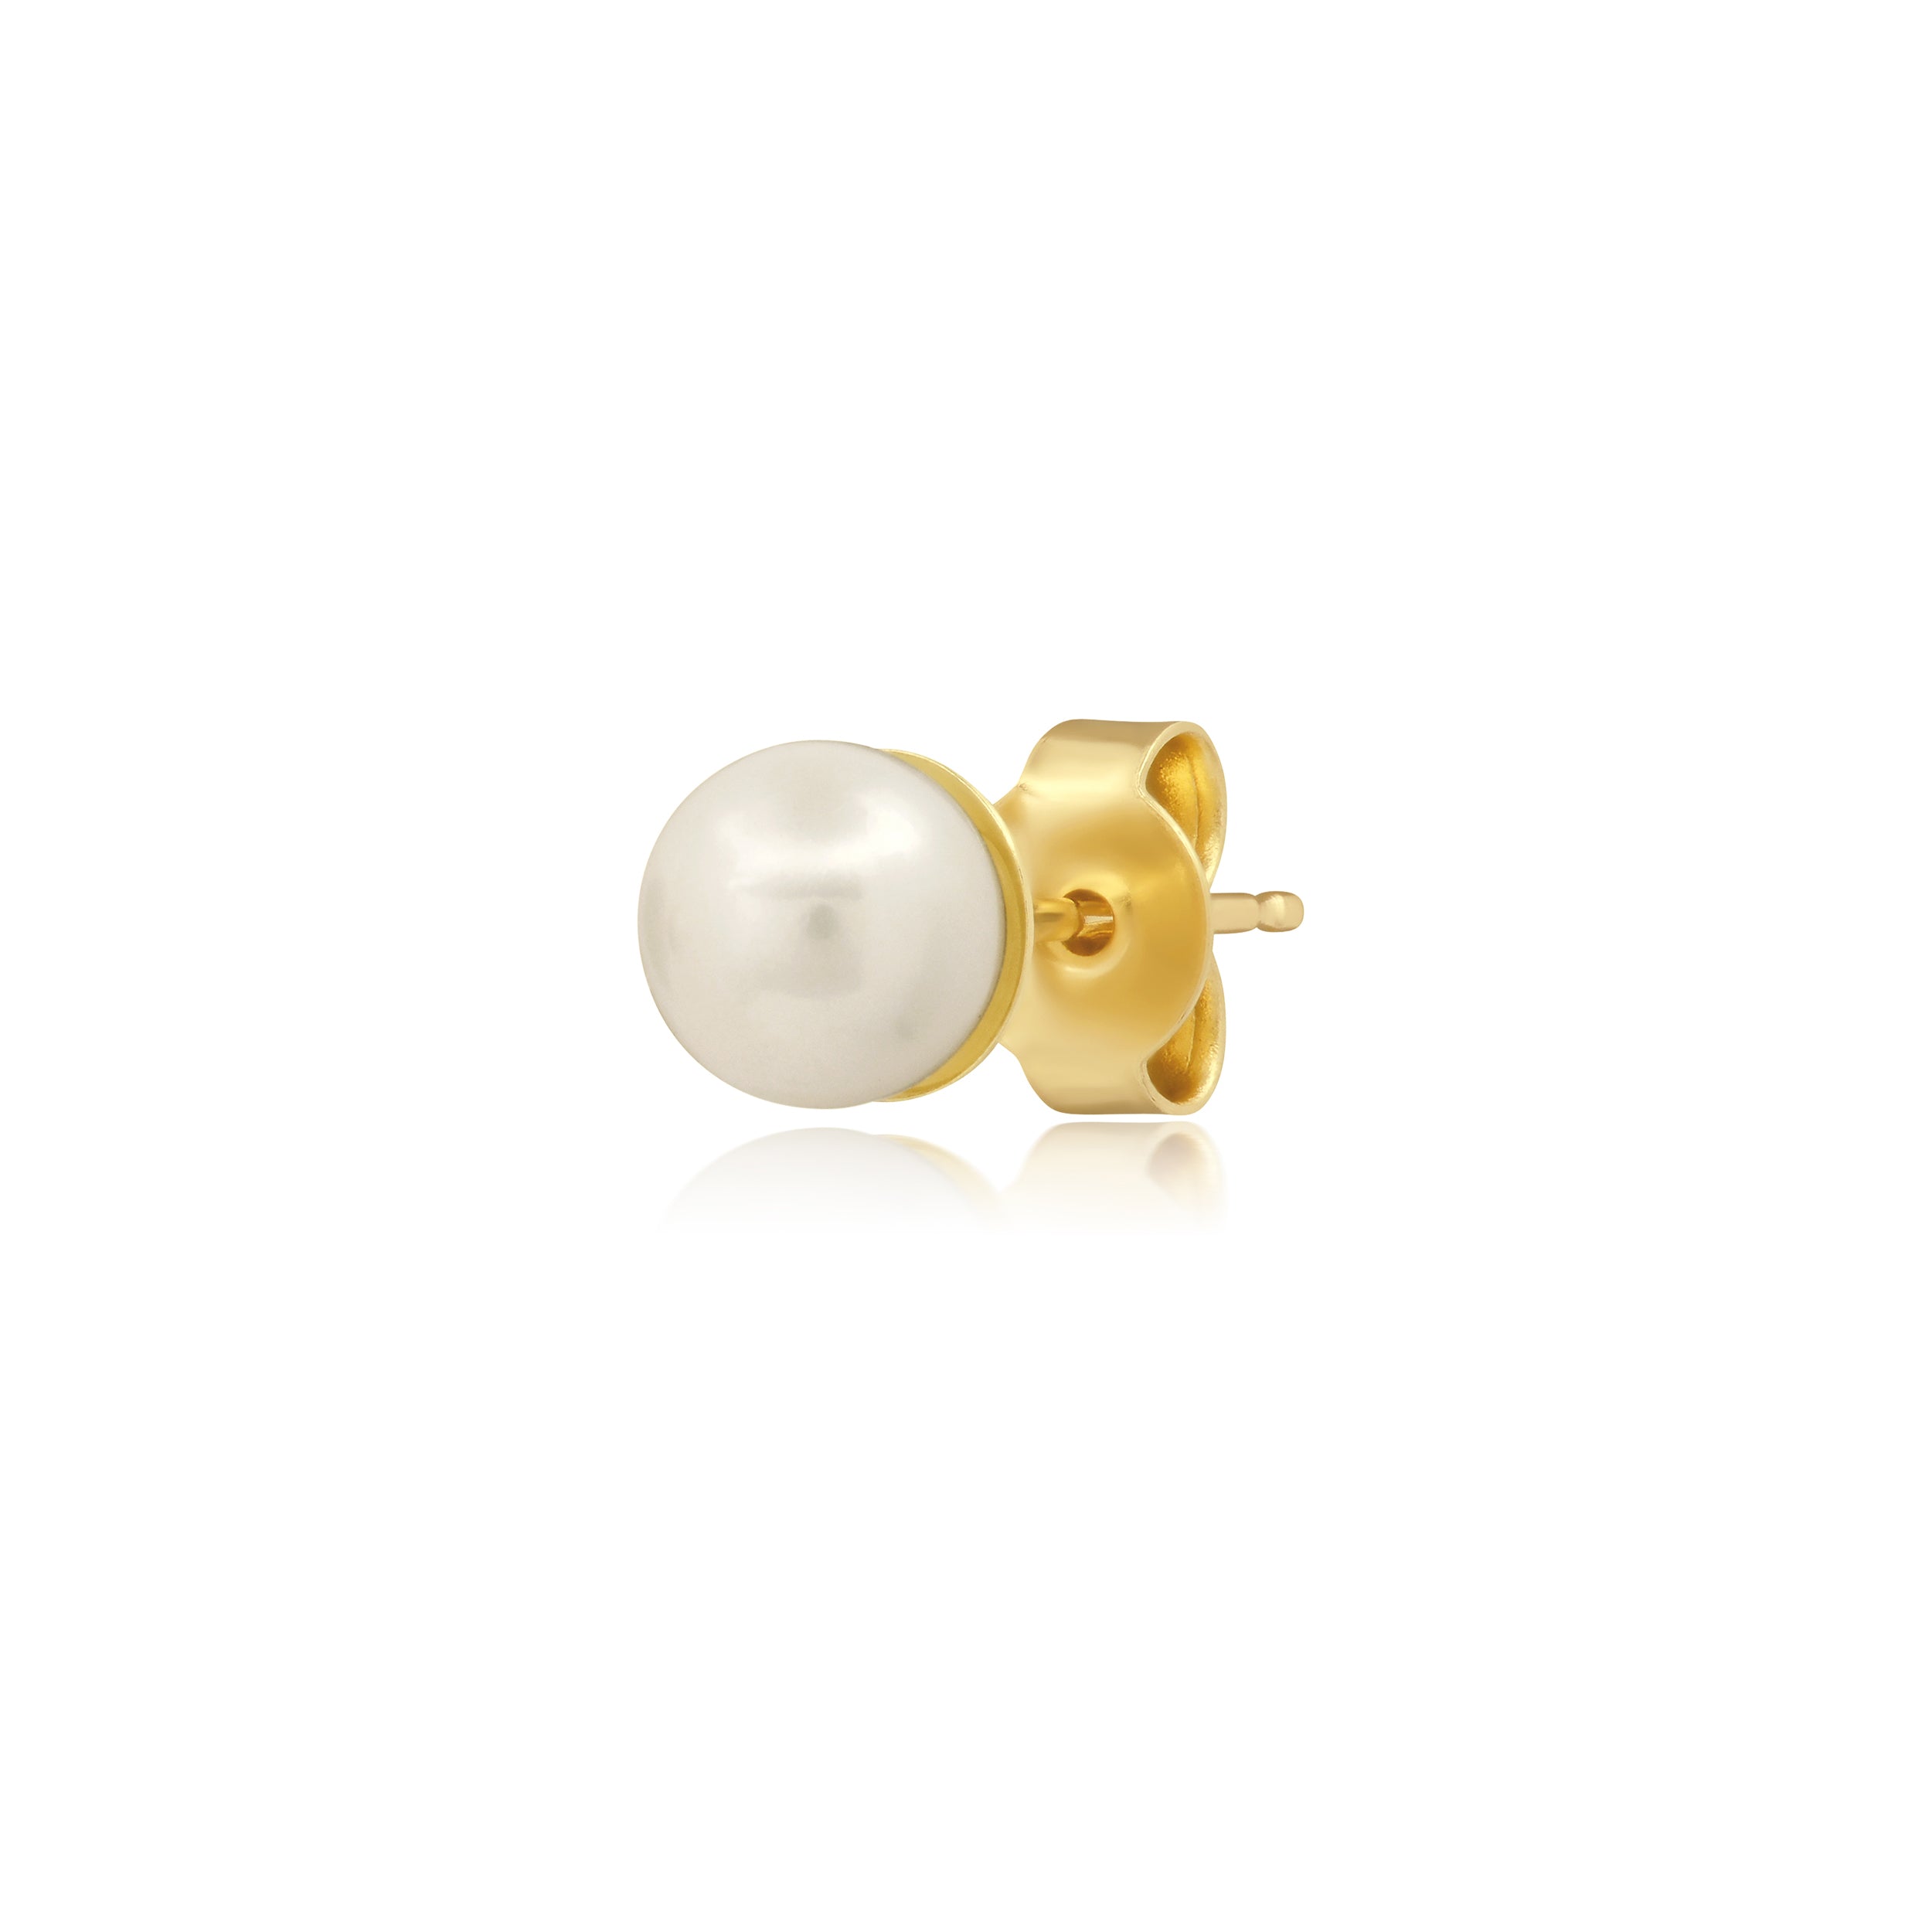 freshwater cultured pearl set in 14k yellow gold.